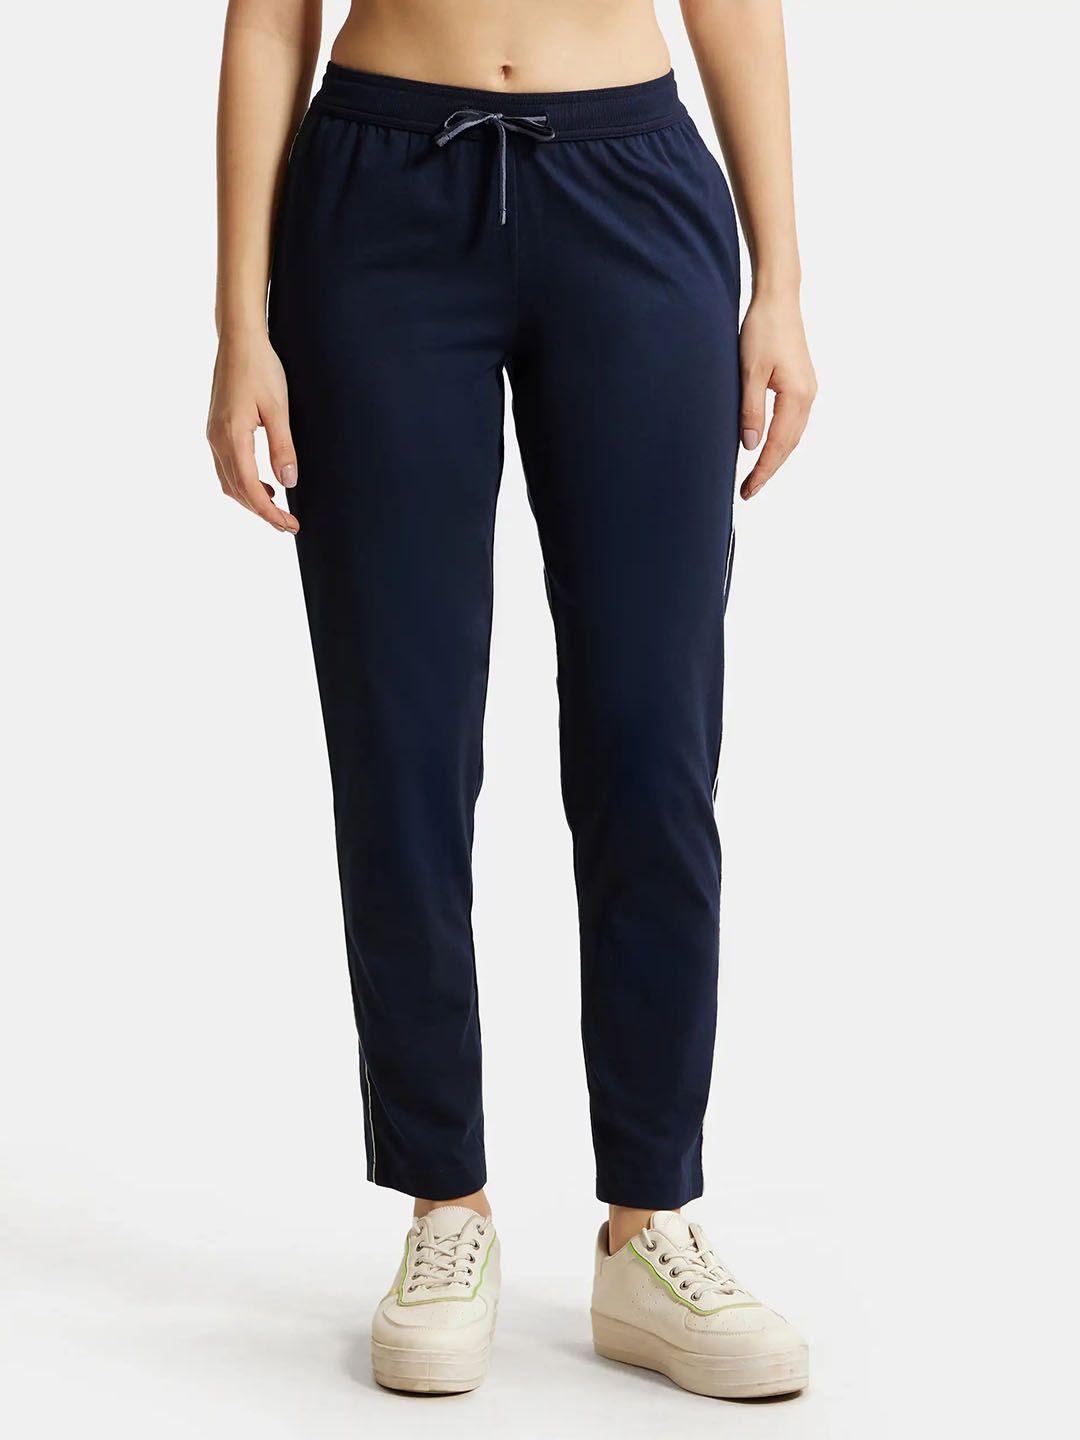 jockey women navy blue solid relaxed-fit track pant